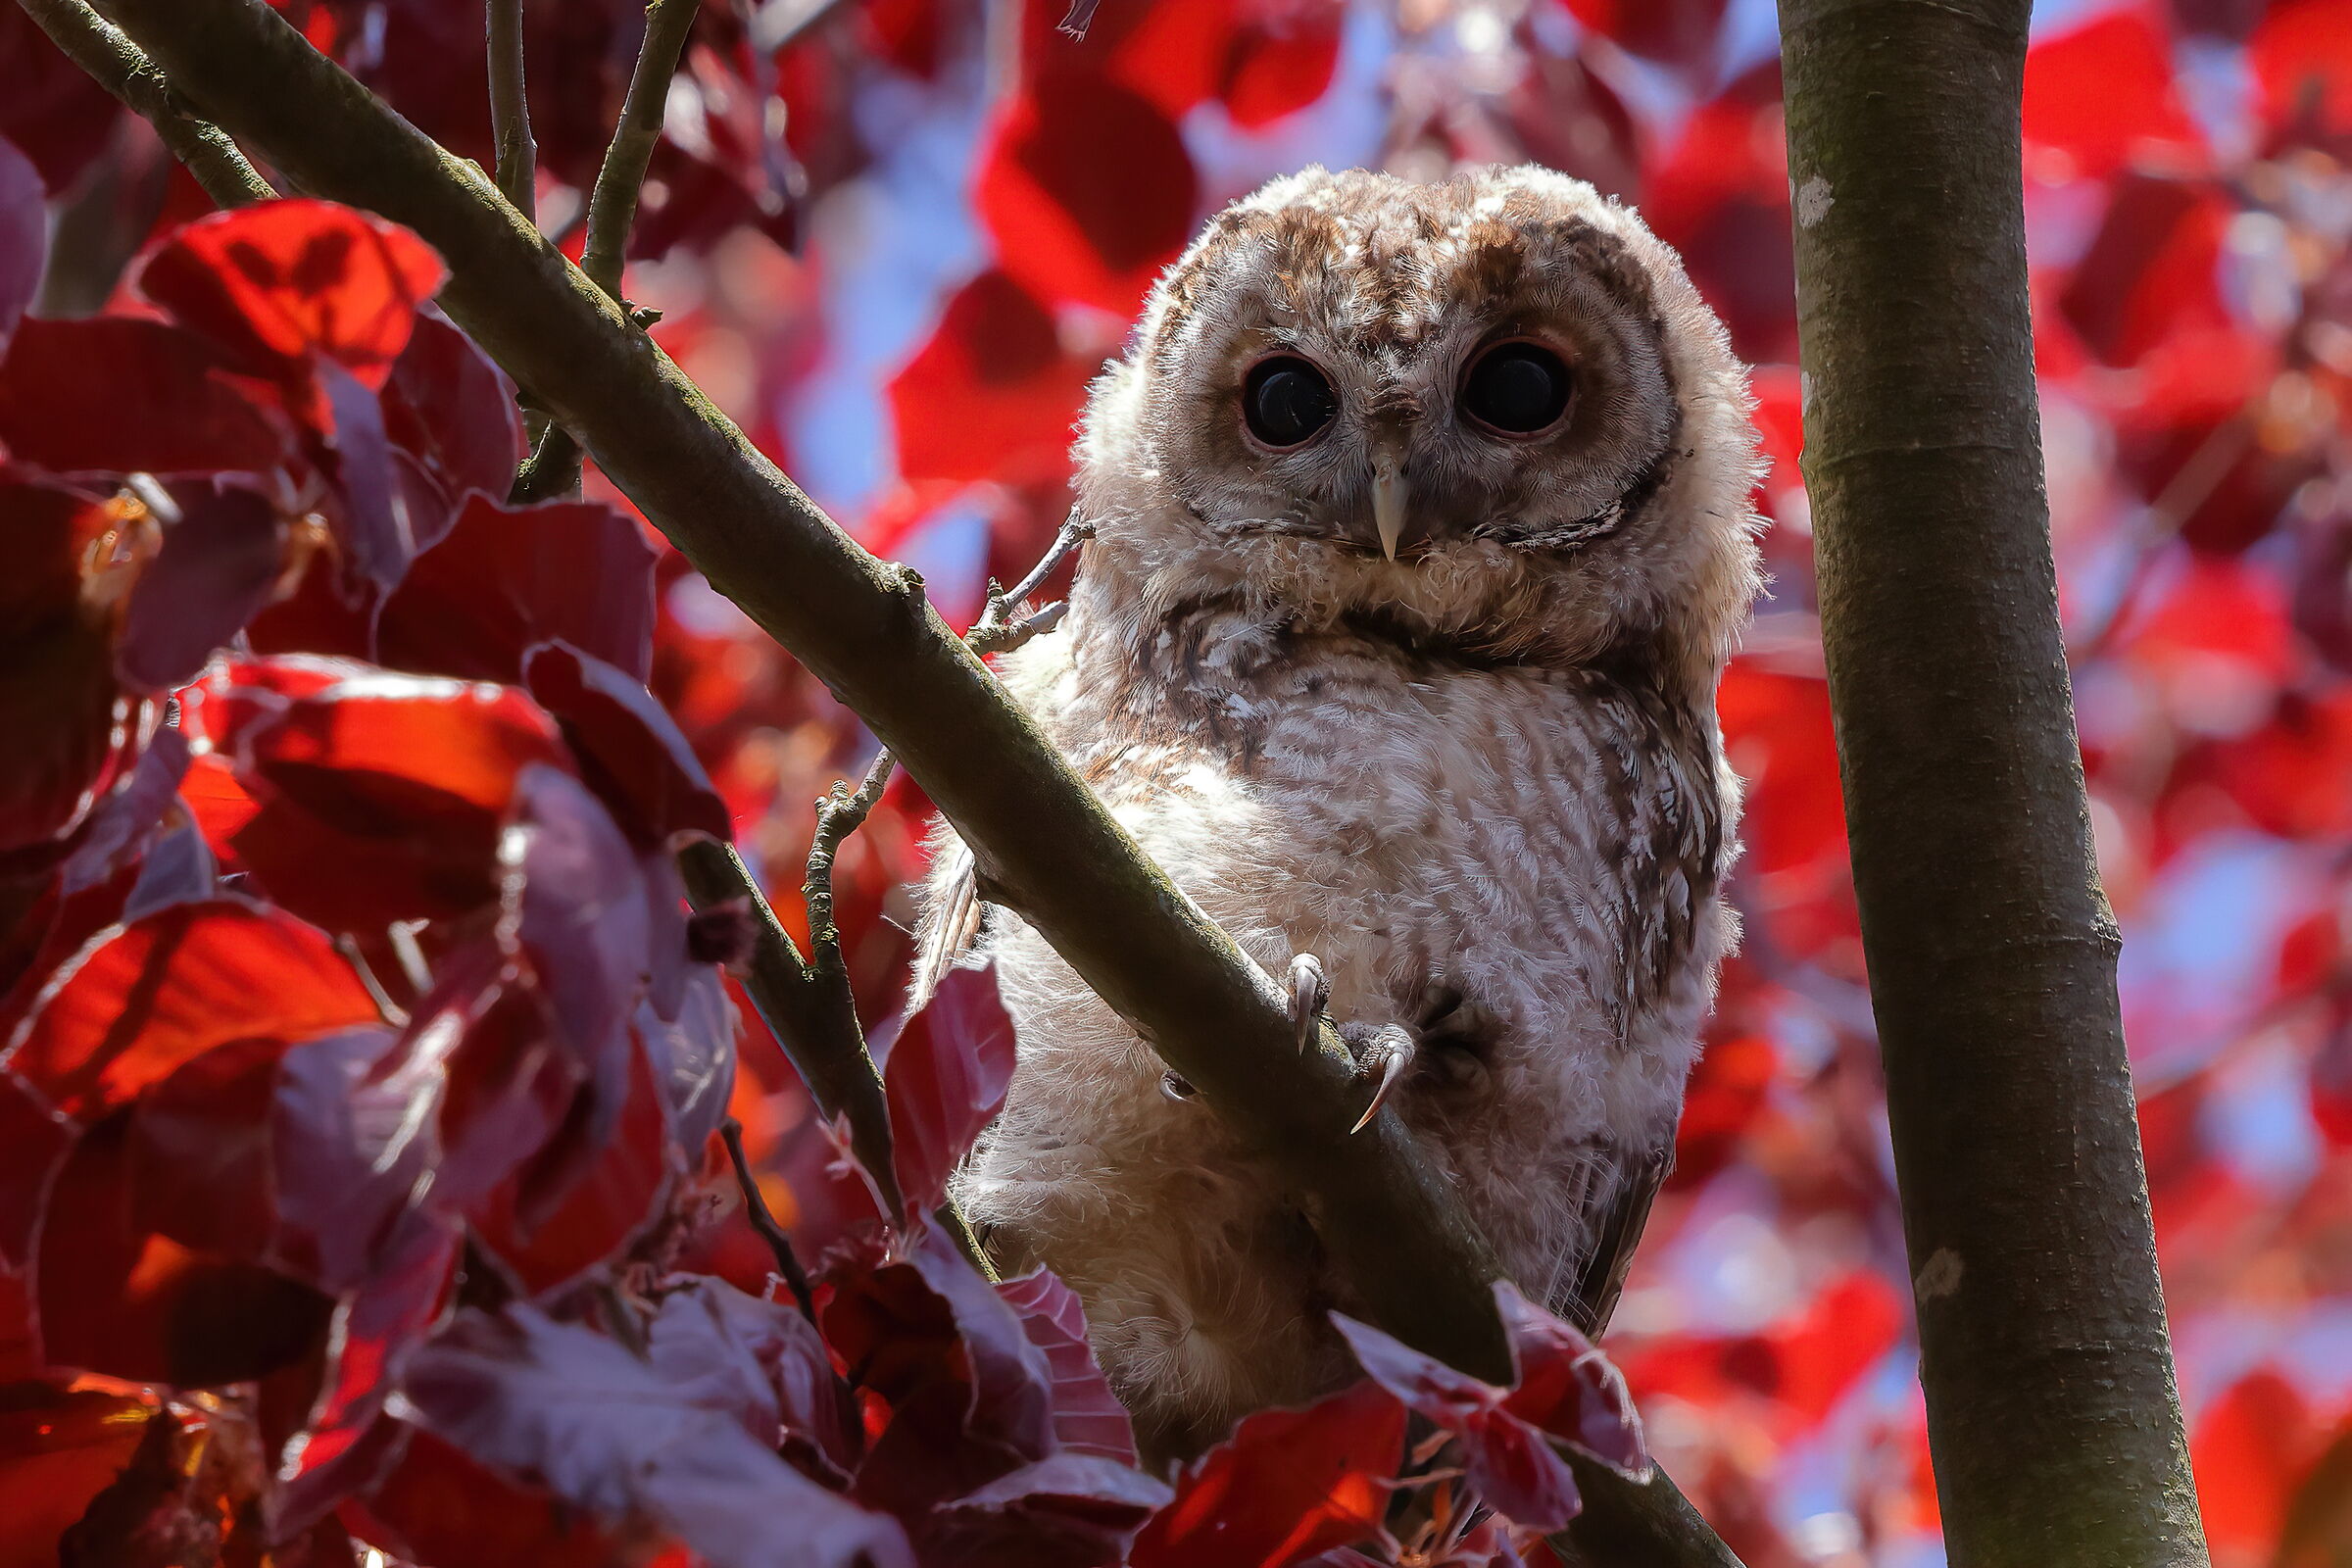 Young tawny owl...